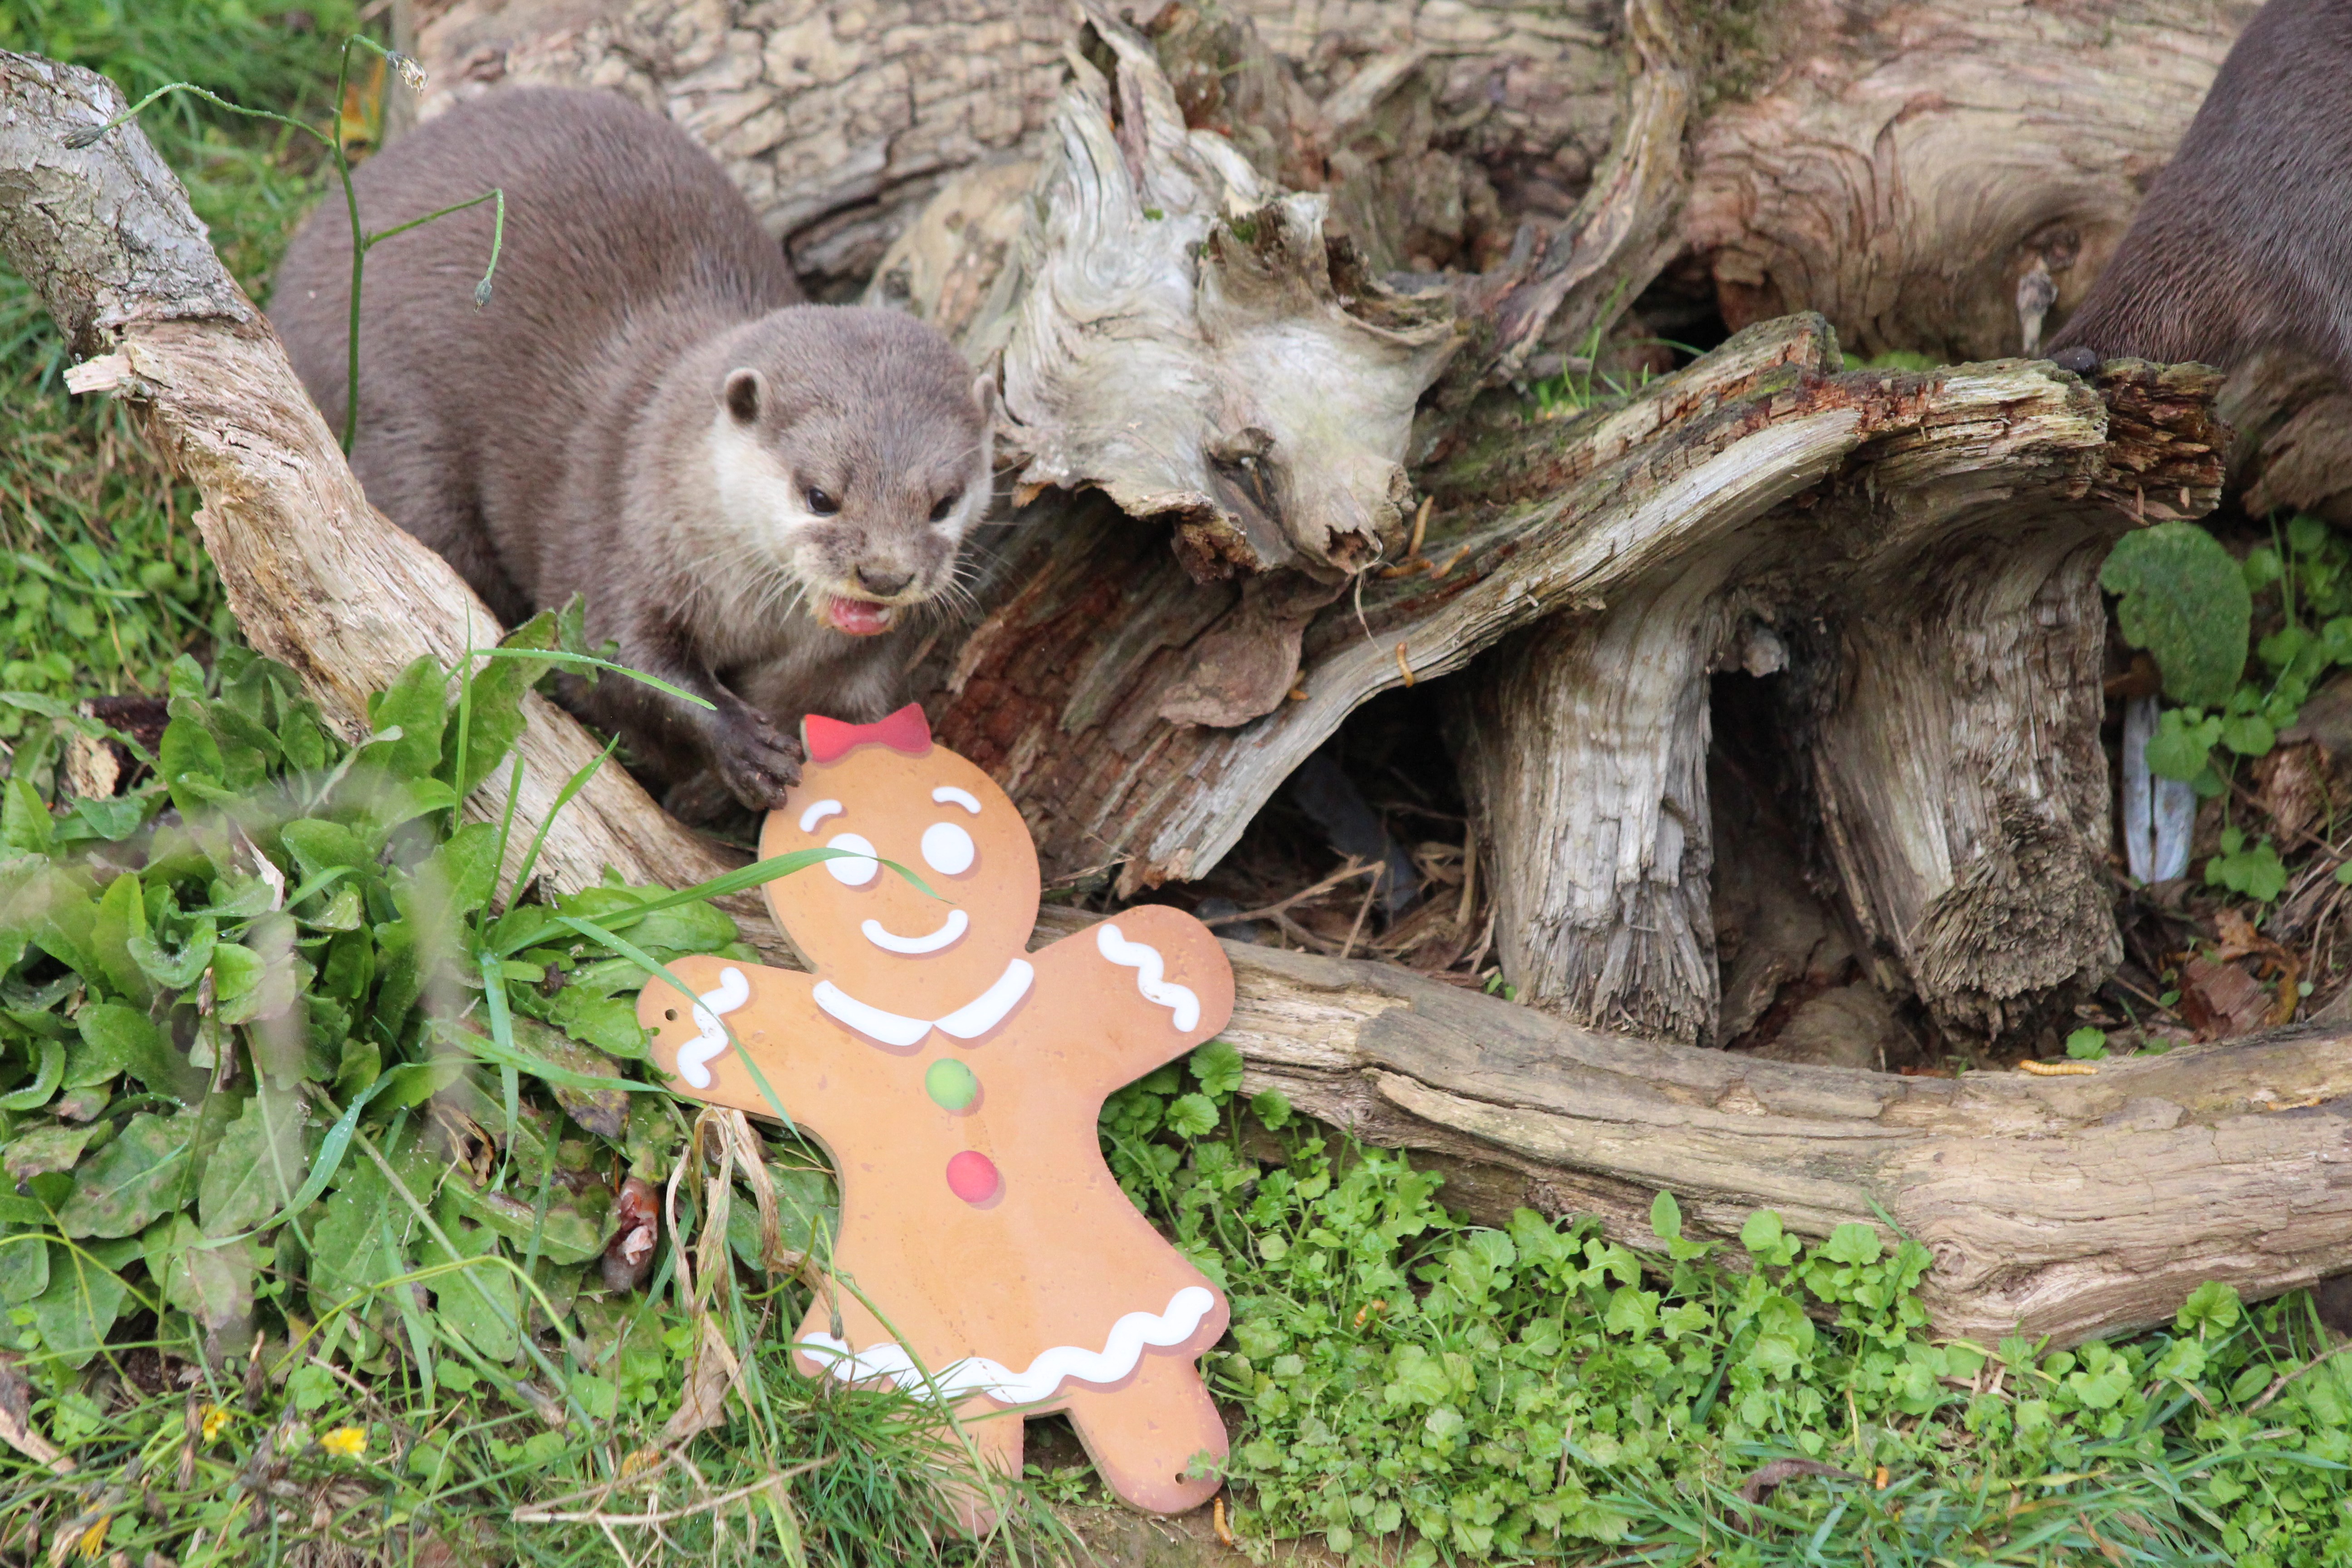 Otter plays with Christmas decorations